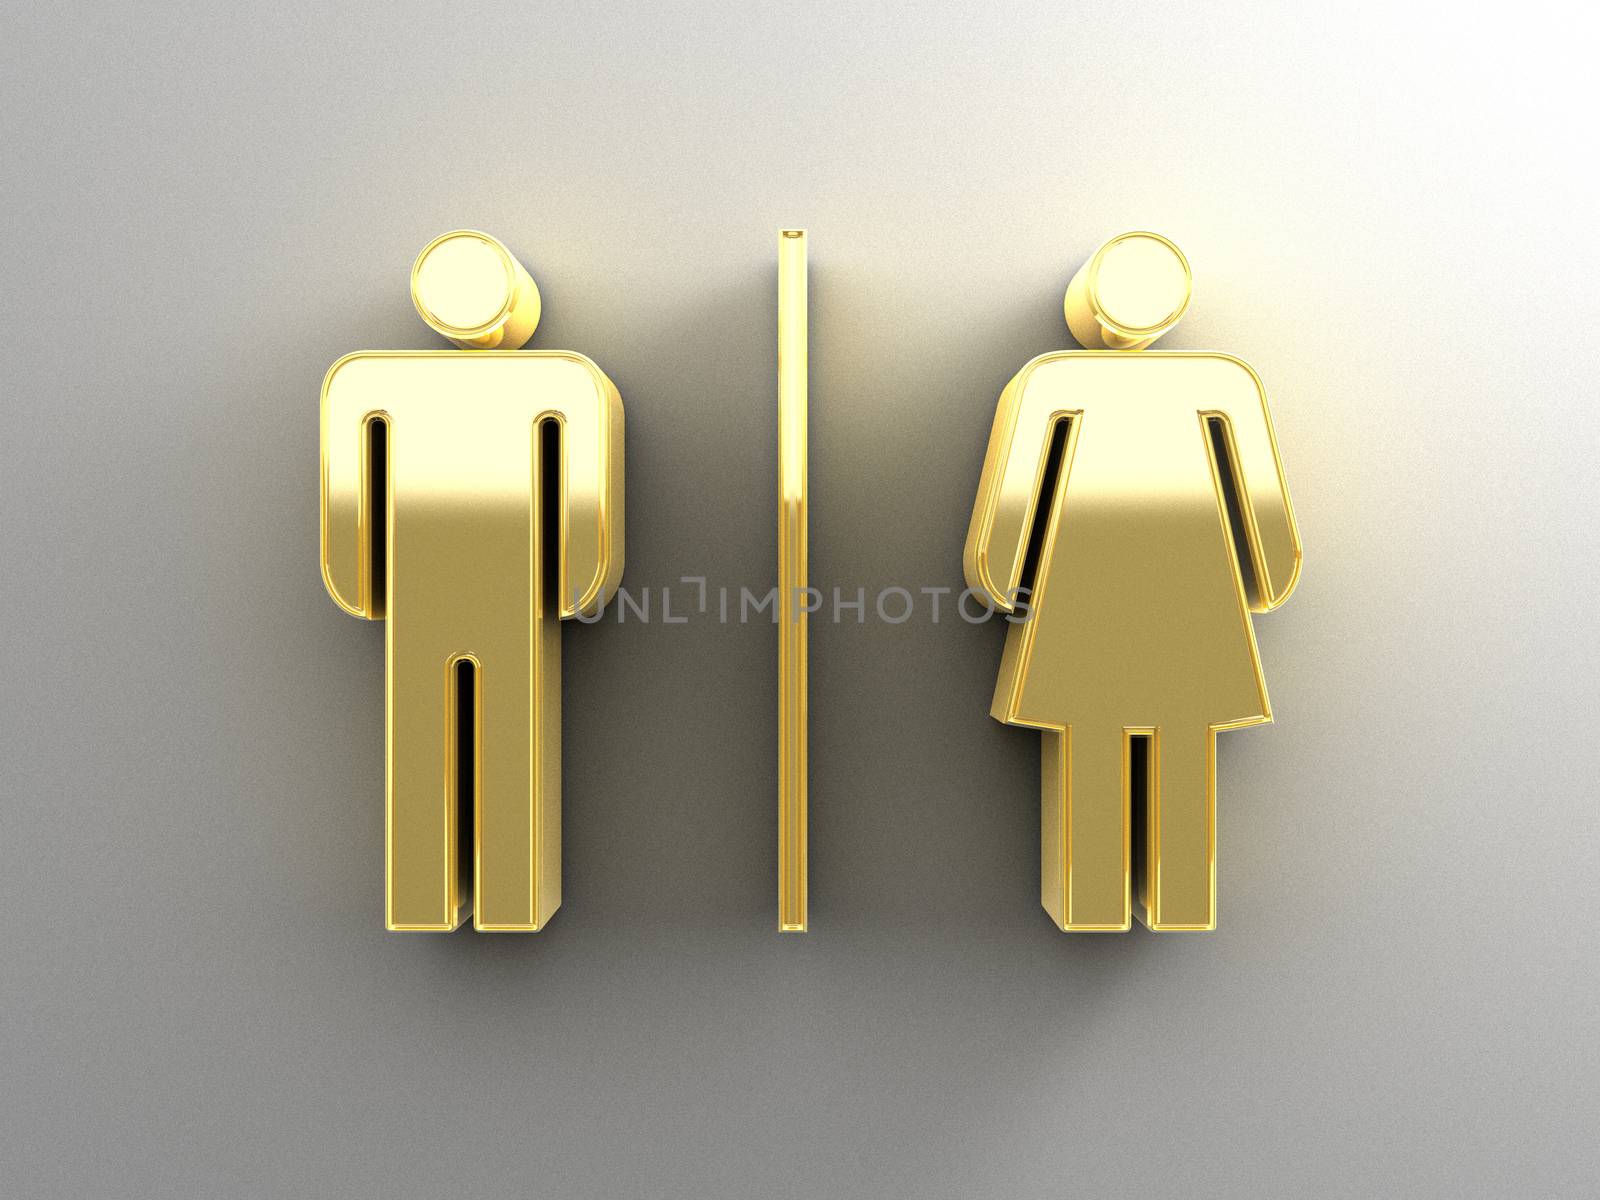 Male and female sex signs - gold 3D quality render on the wall background with soft shadow.